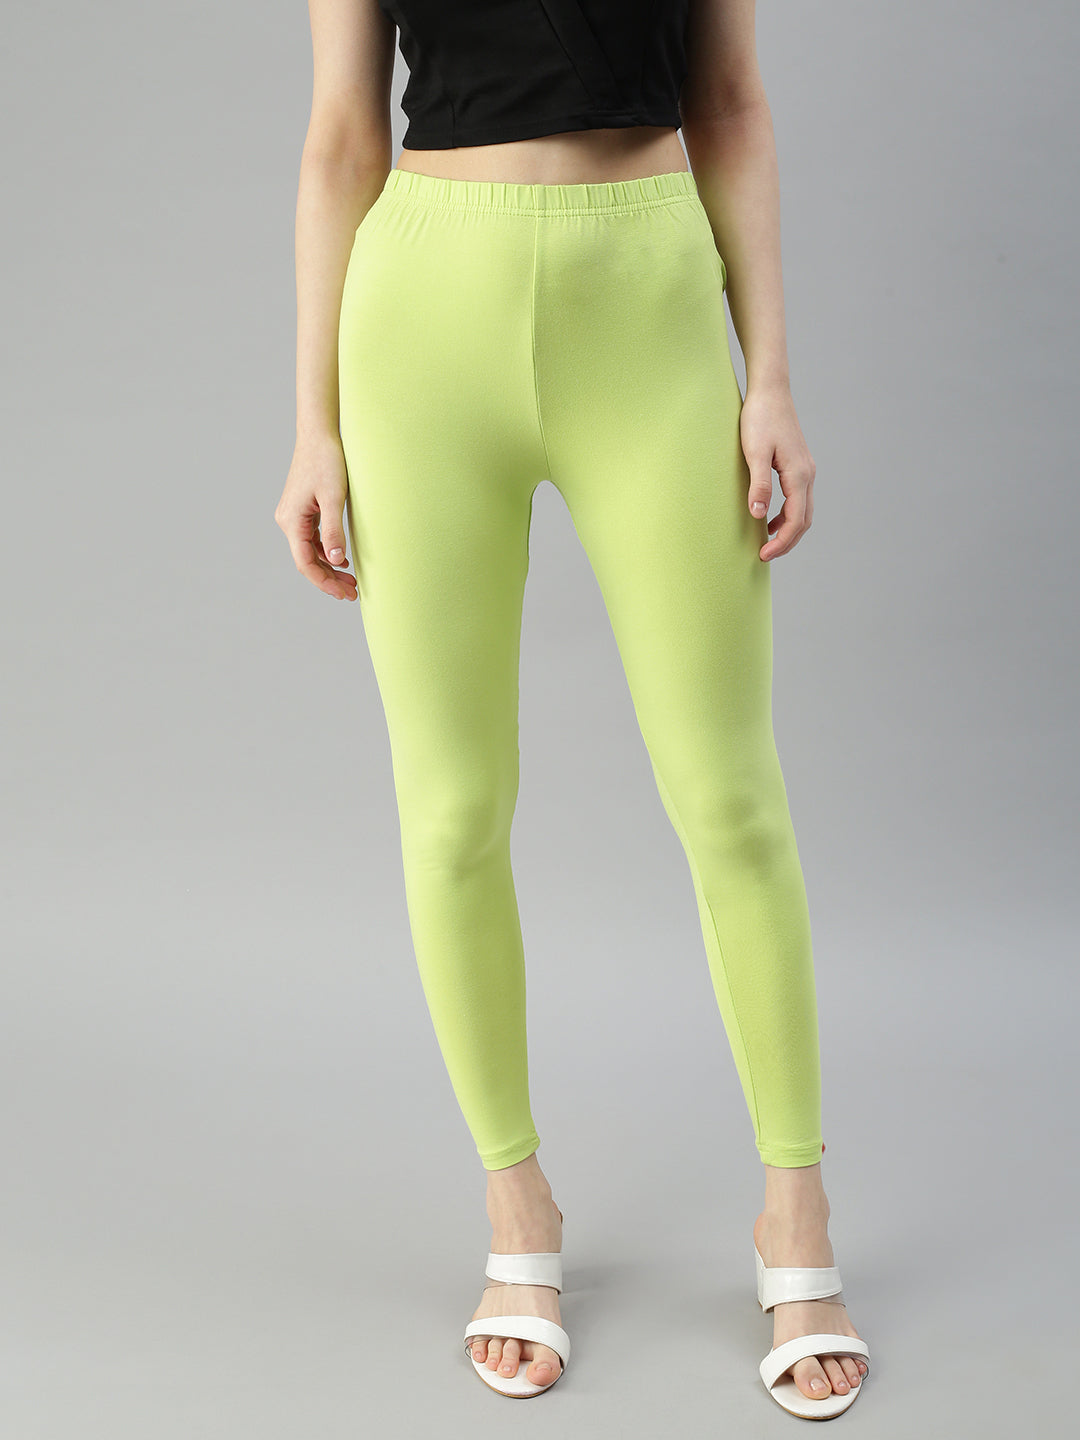 Prisma's Lime Green Ankle Leggings for Women - Comfortable & Stylish